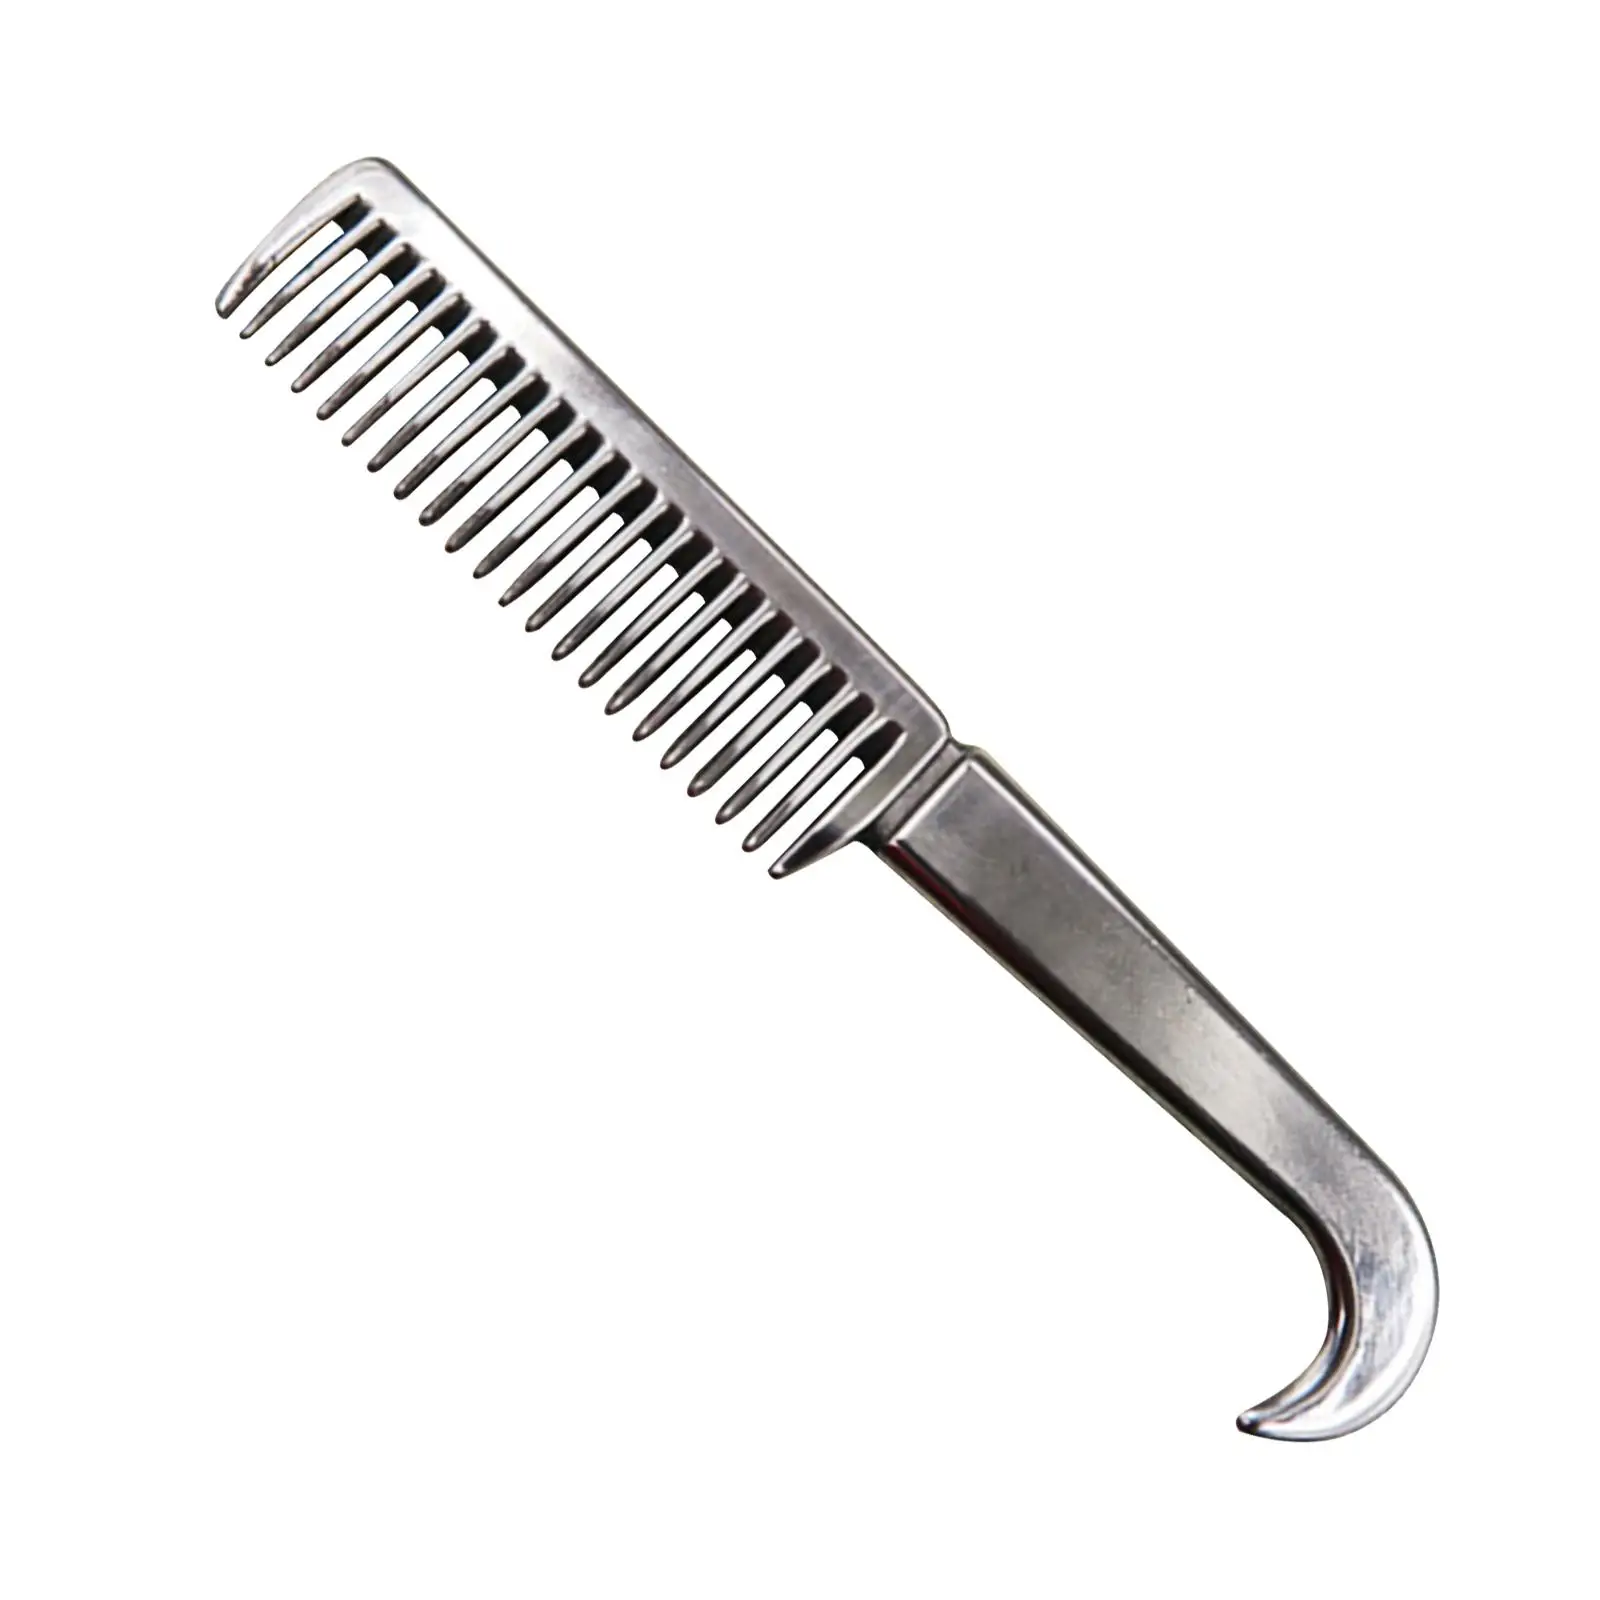 Horse Hair Comb Removing Tangles and Knots Long Hair Short Hair Stainless Steel Cattle Grooming Brush Equestrian Supplies